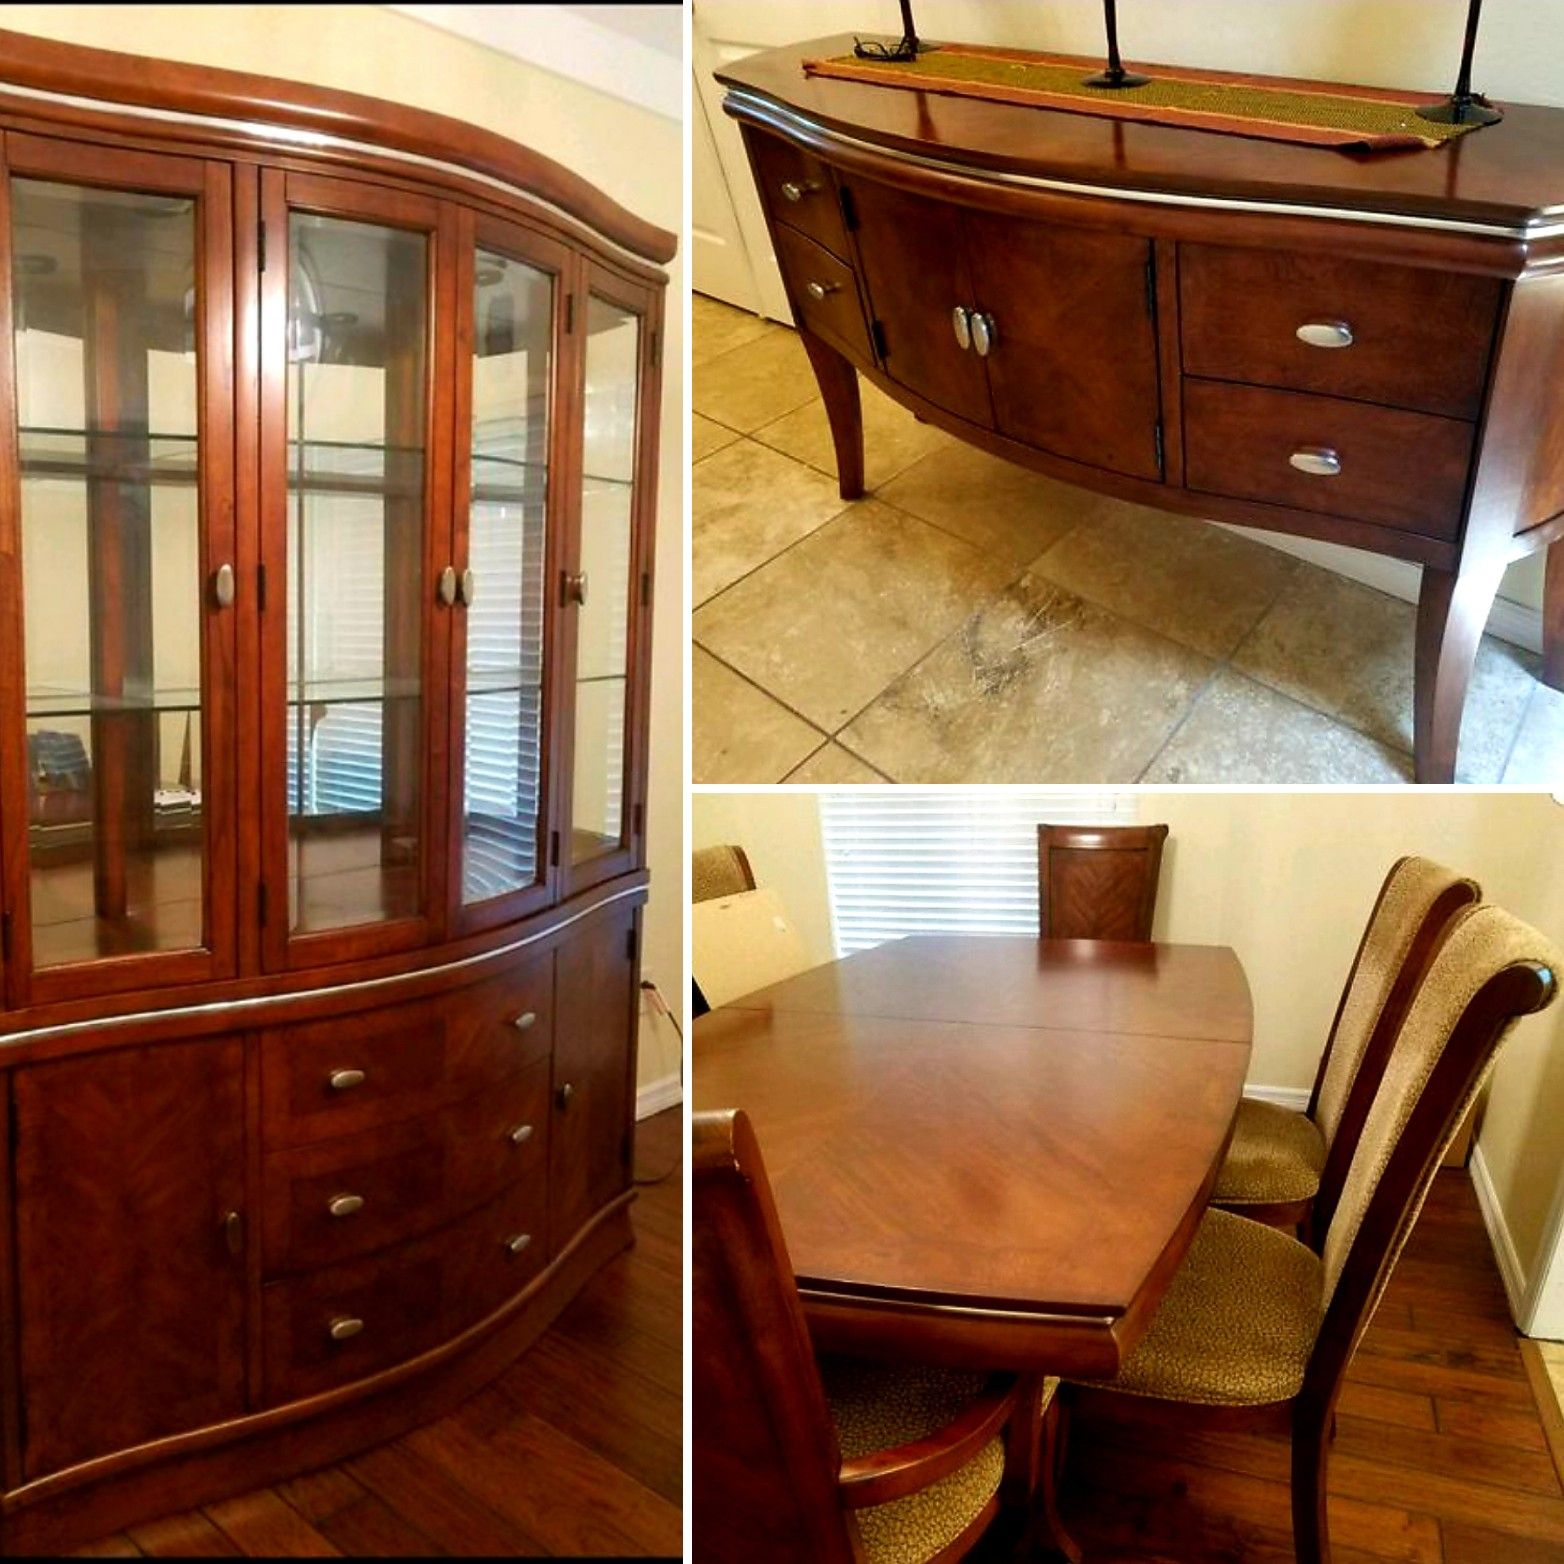 Solid wood brown dining set: table/6 chairs, hutch/cabinet, and front hallway console table